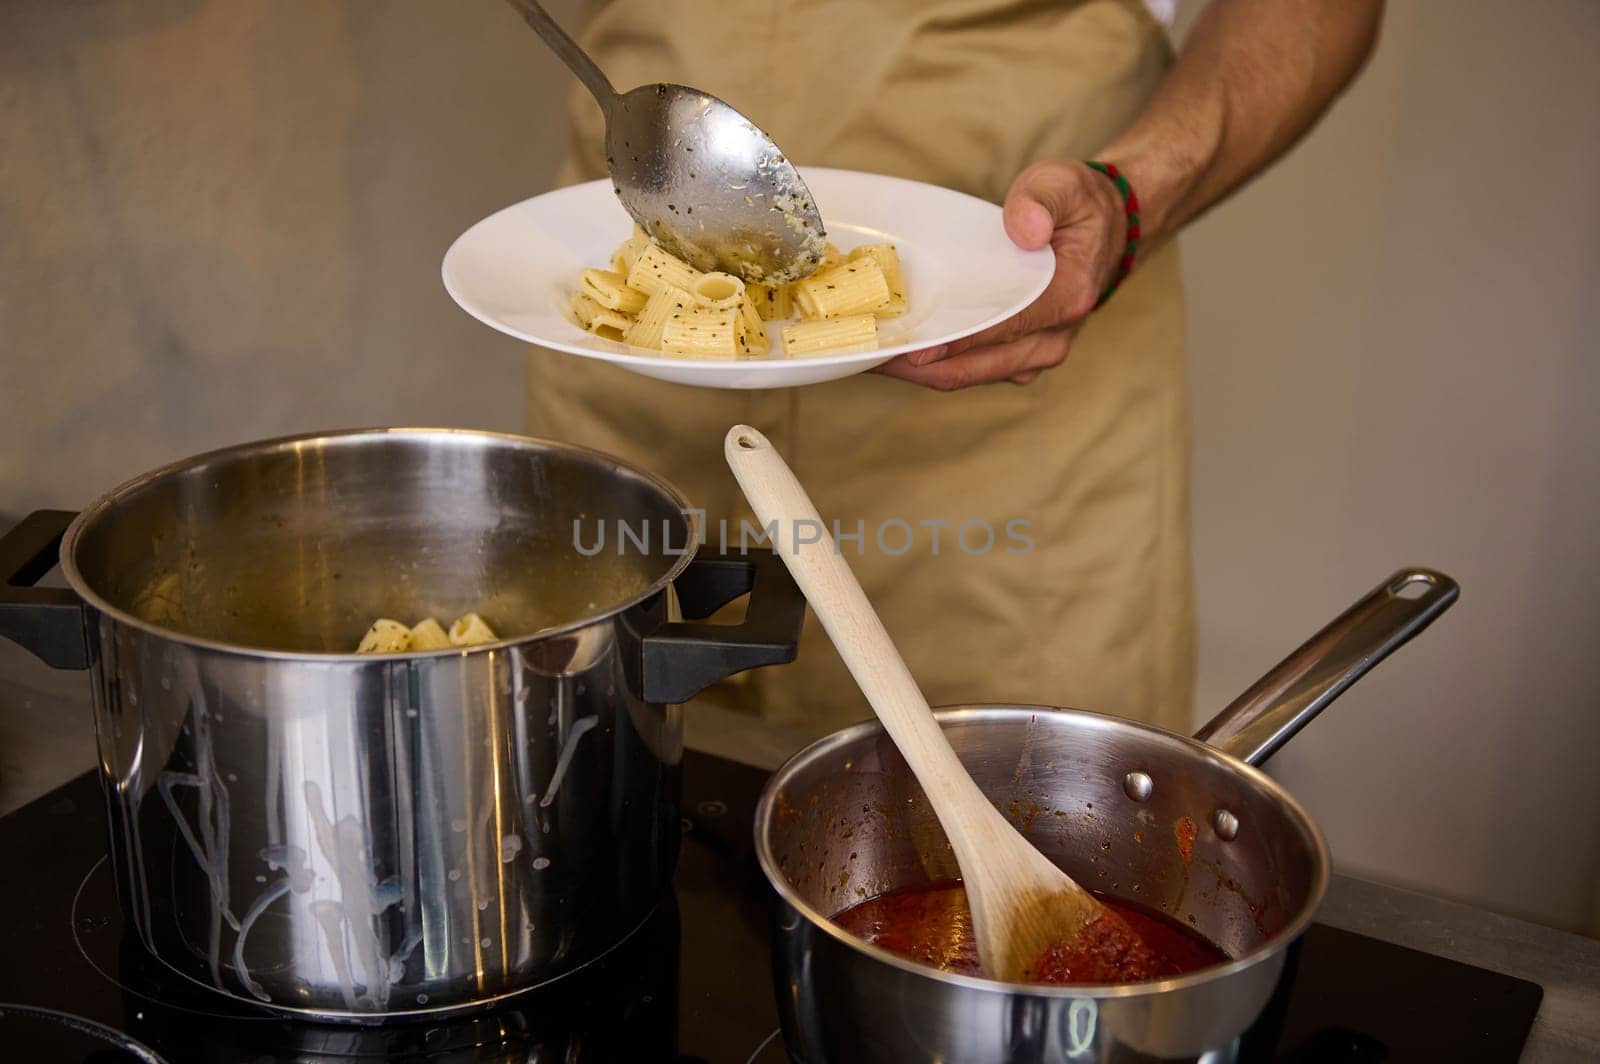 Close-up chef's hands plating up freshly cooked pasta, putting boiled penne on a white plate, standing at induction electric stove with saucepan full of tomato pasta. Italian culinary. Food background